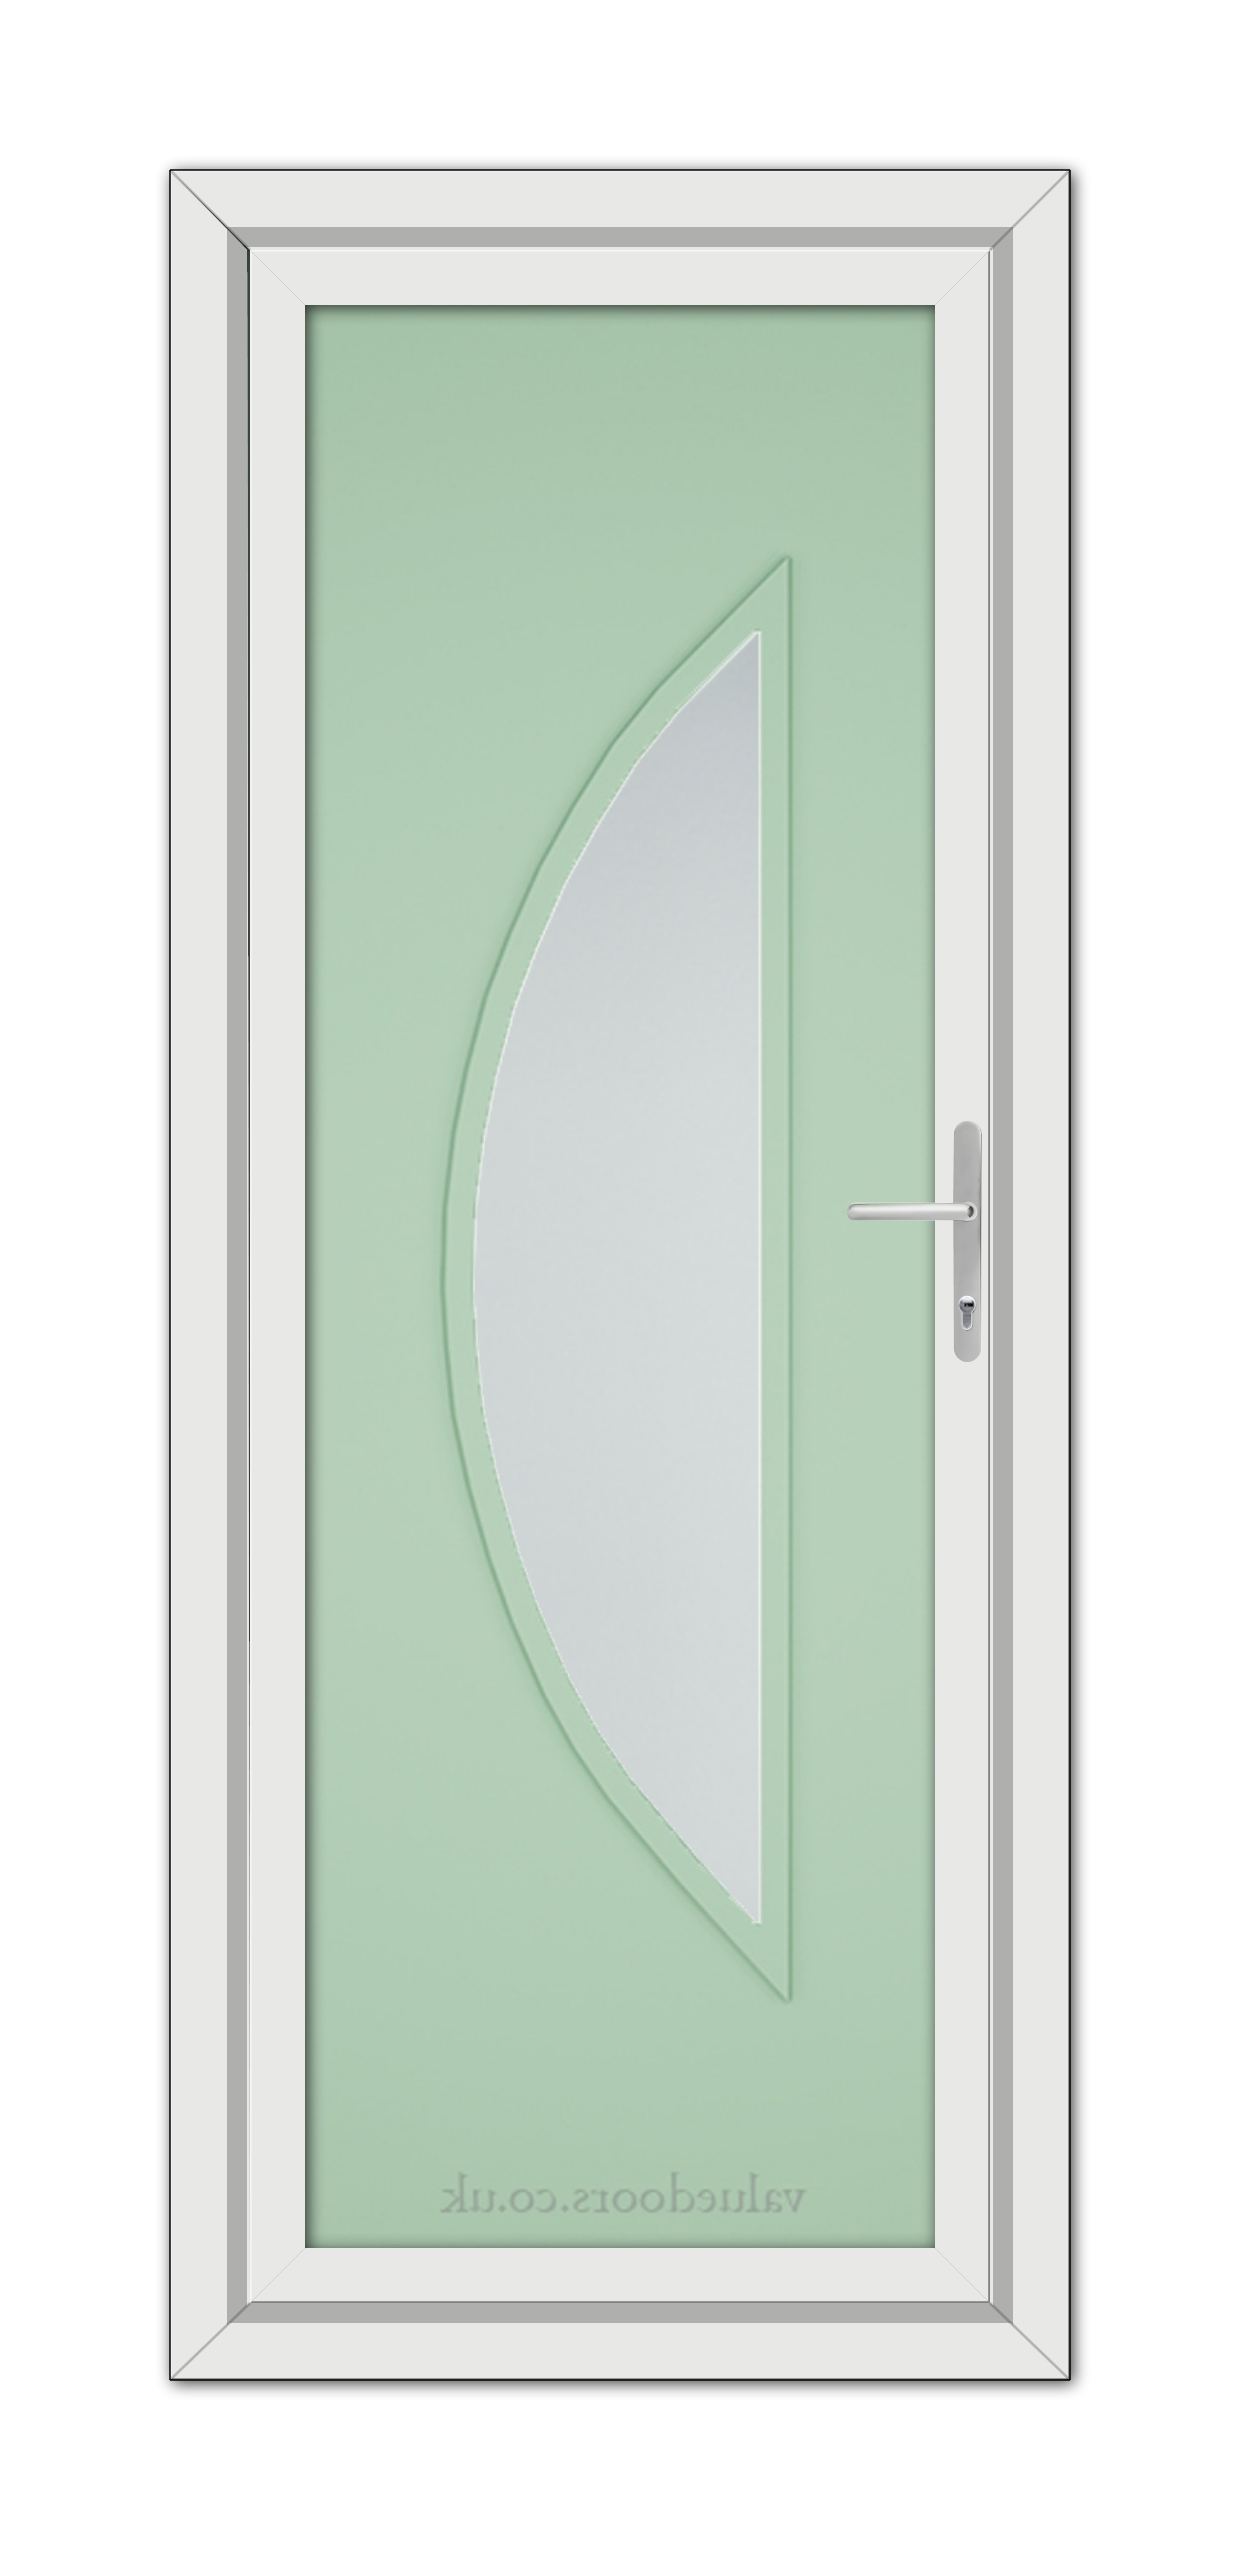 A Chartwell Green Modern 5051 uPVC Door featuring a pastel green panel with an asymmetrical frosted glass window on the left side, enclosed in a white frame.